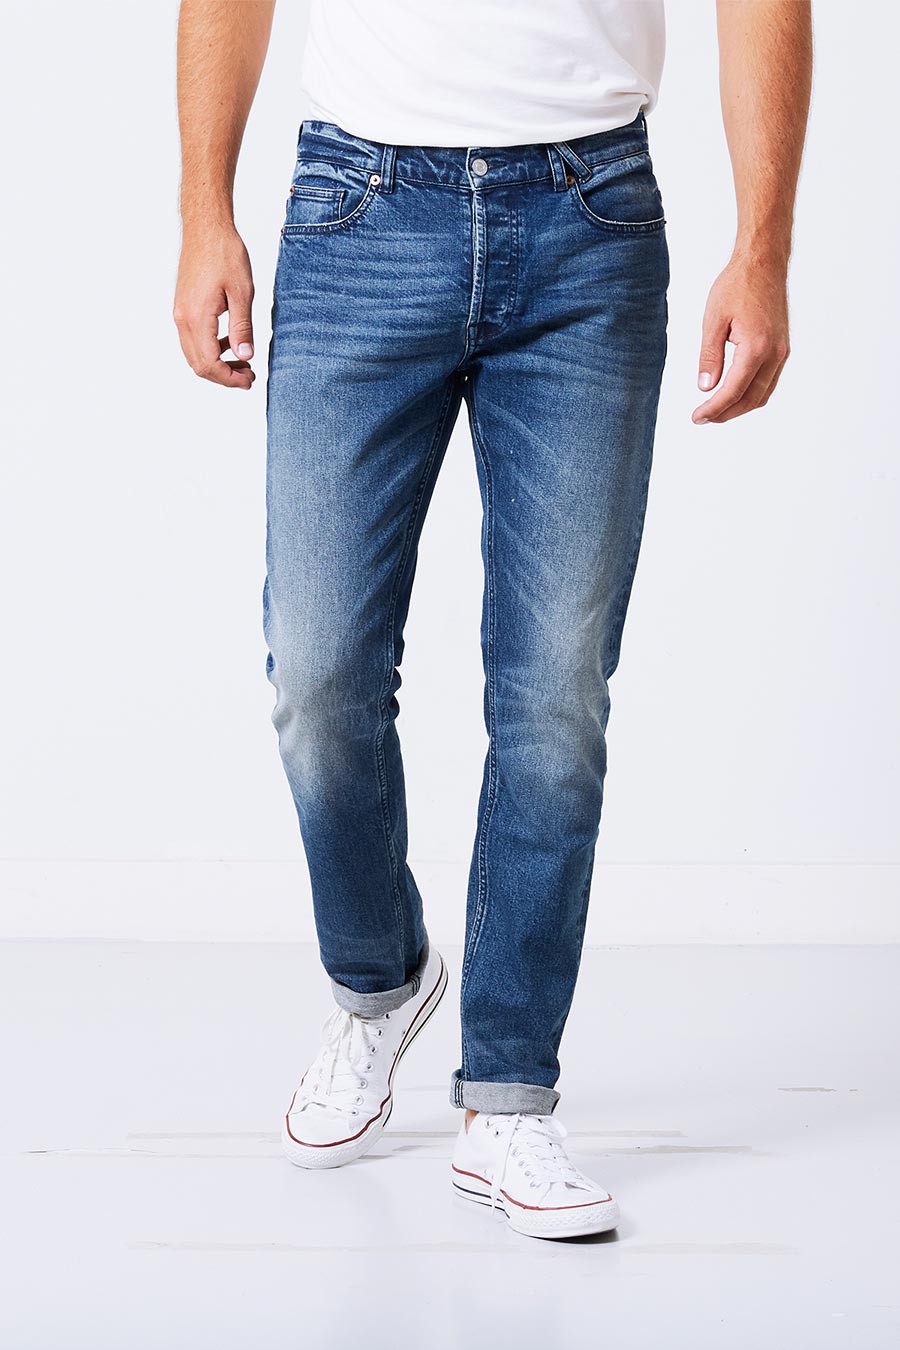 Herren jeans fit guide | America Today